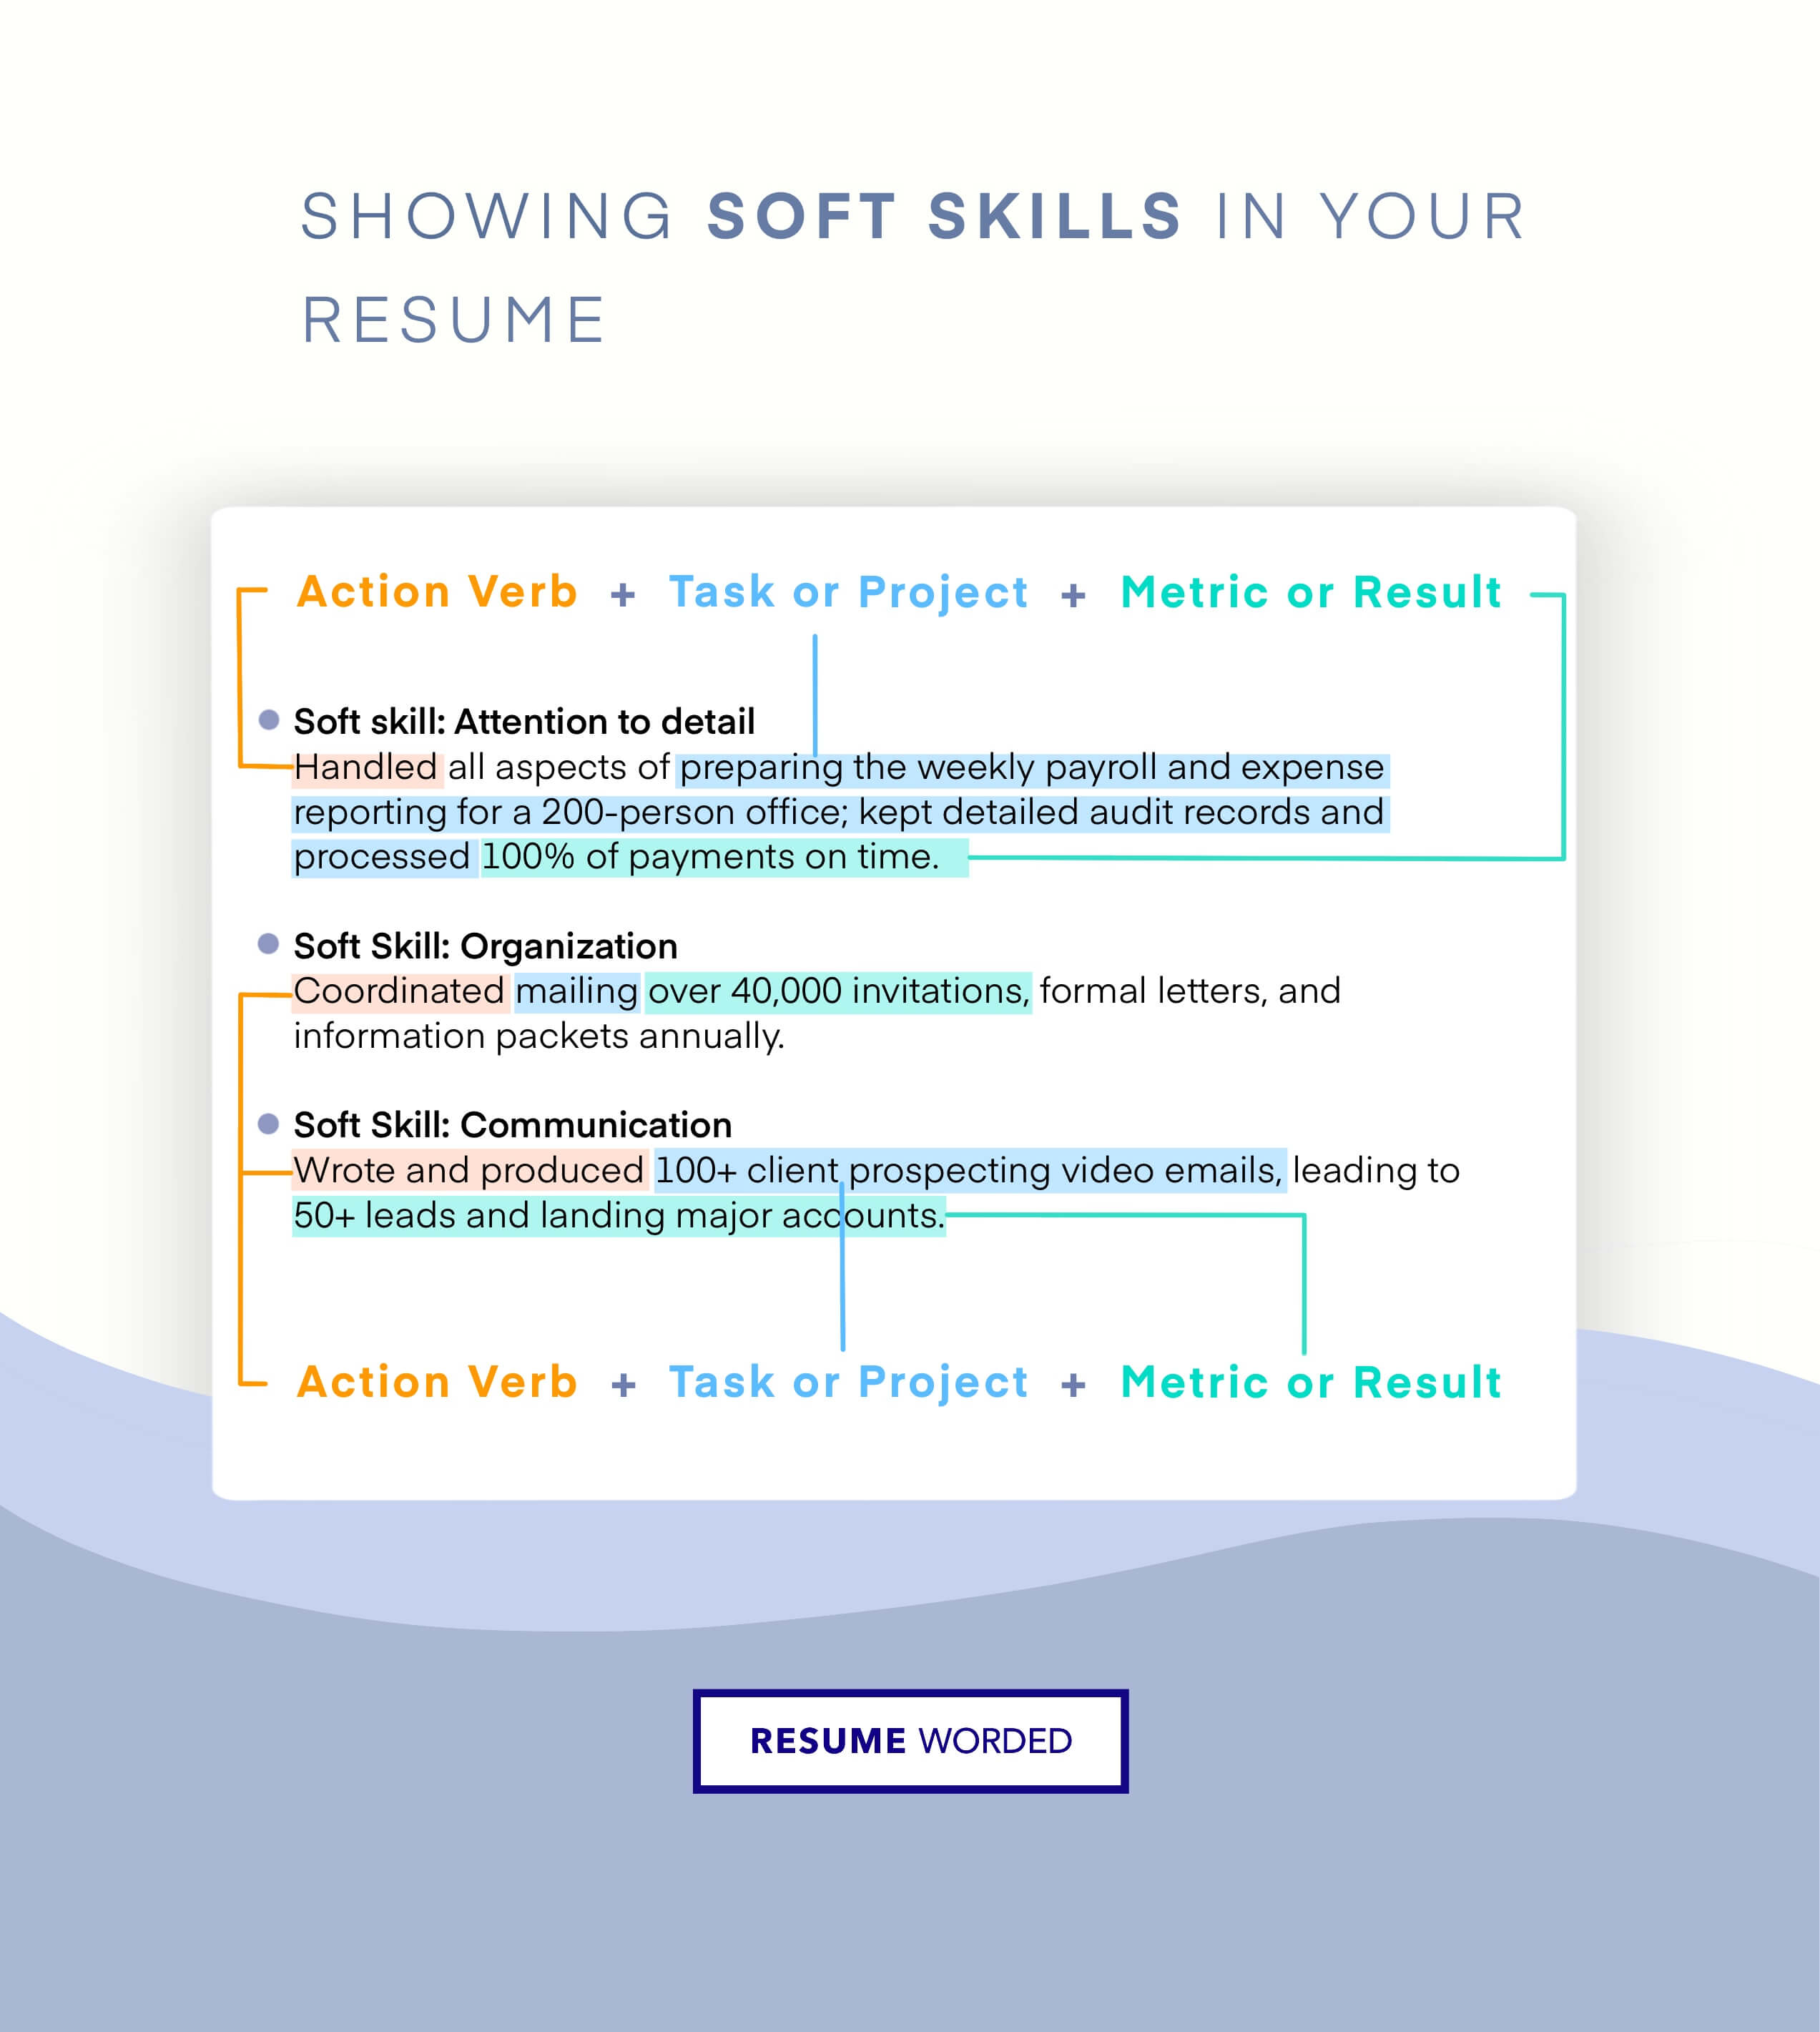 Demonstrate your soft skills - Occupational Therapist CV